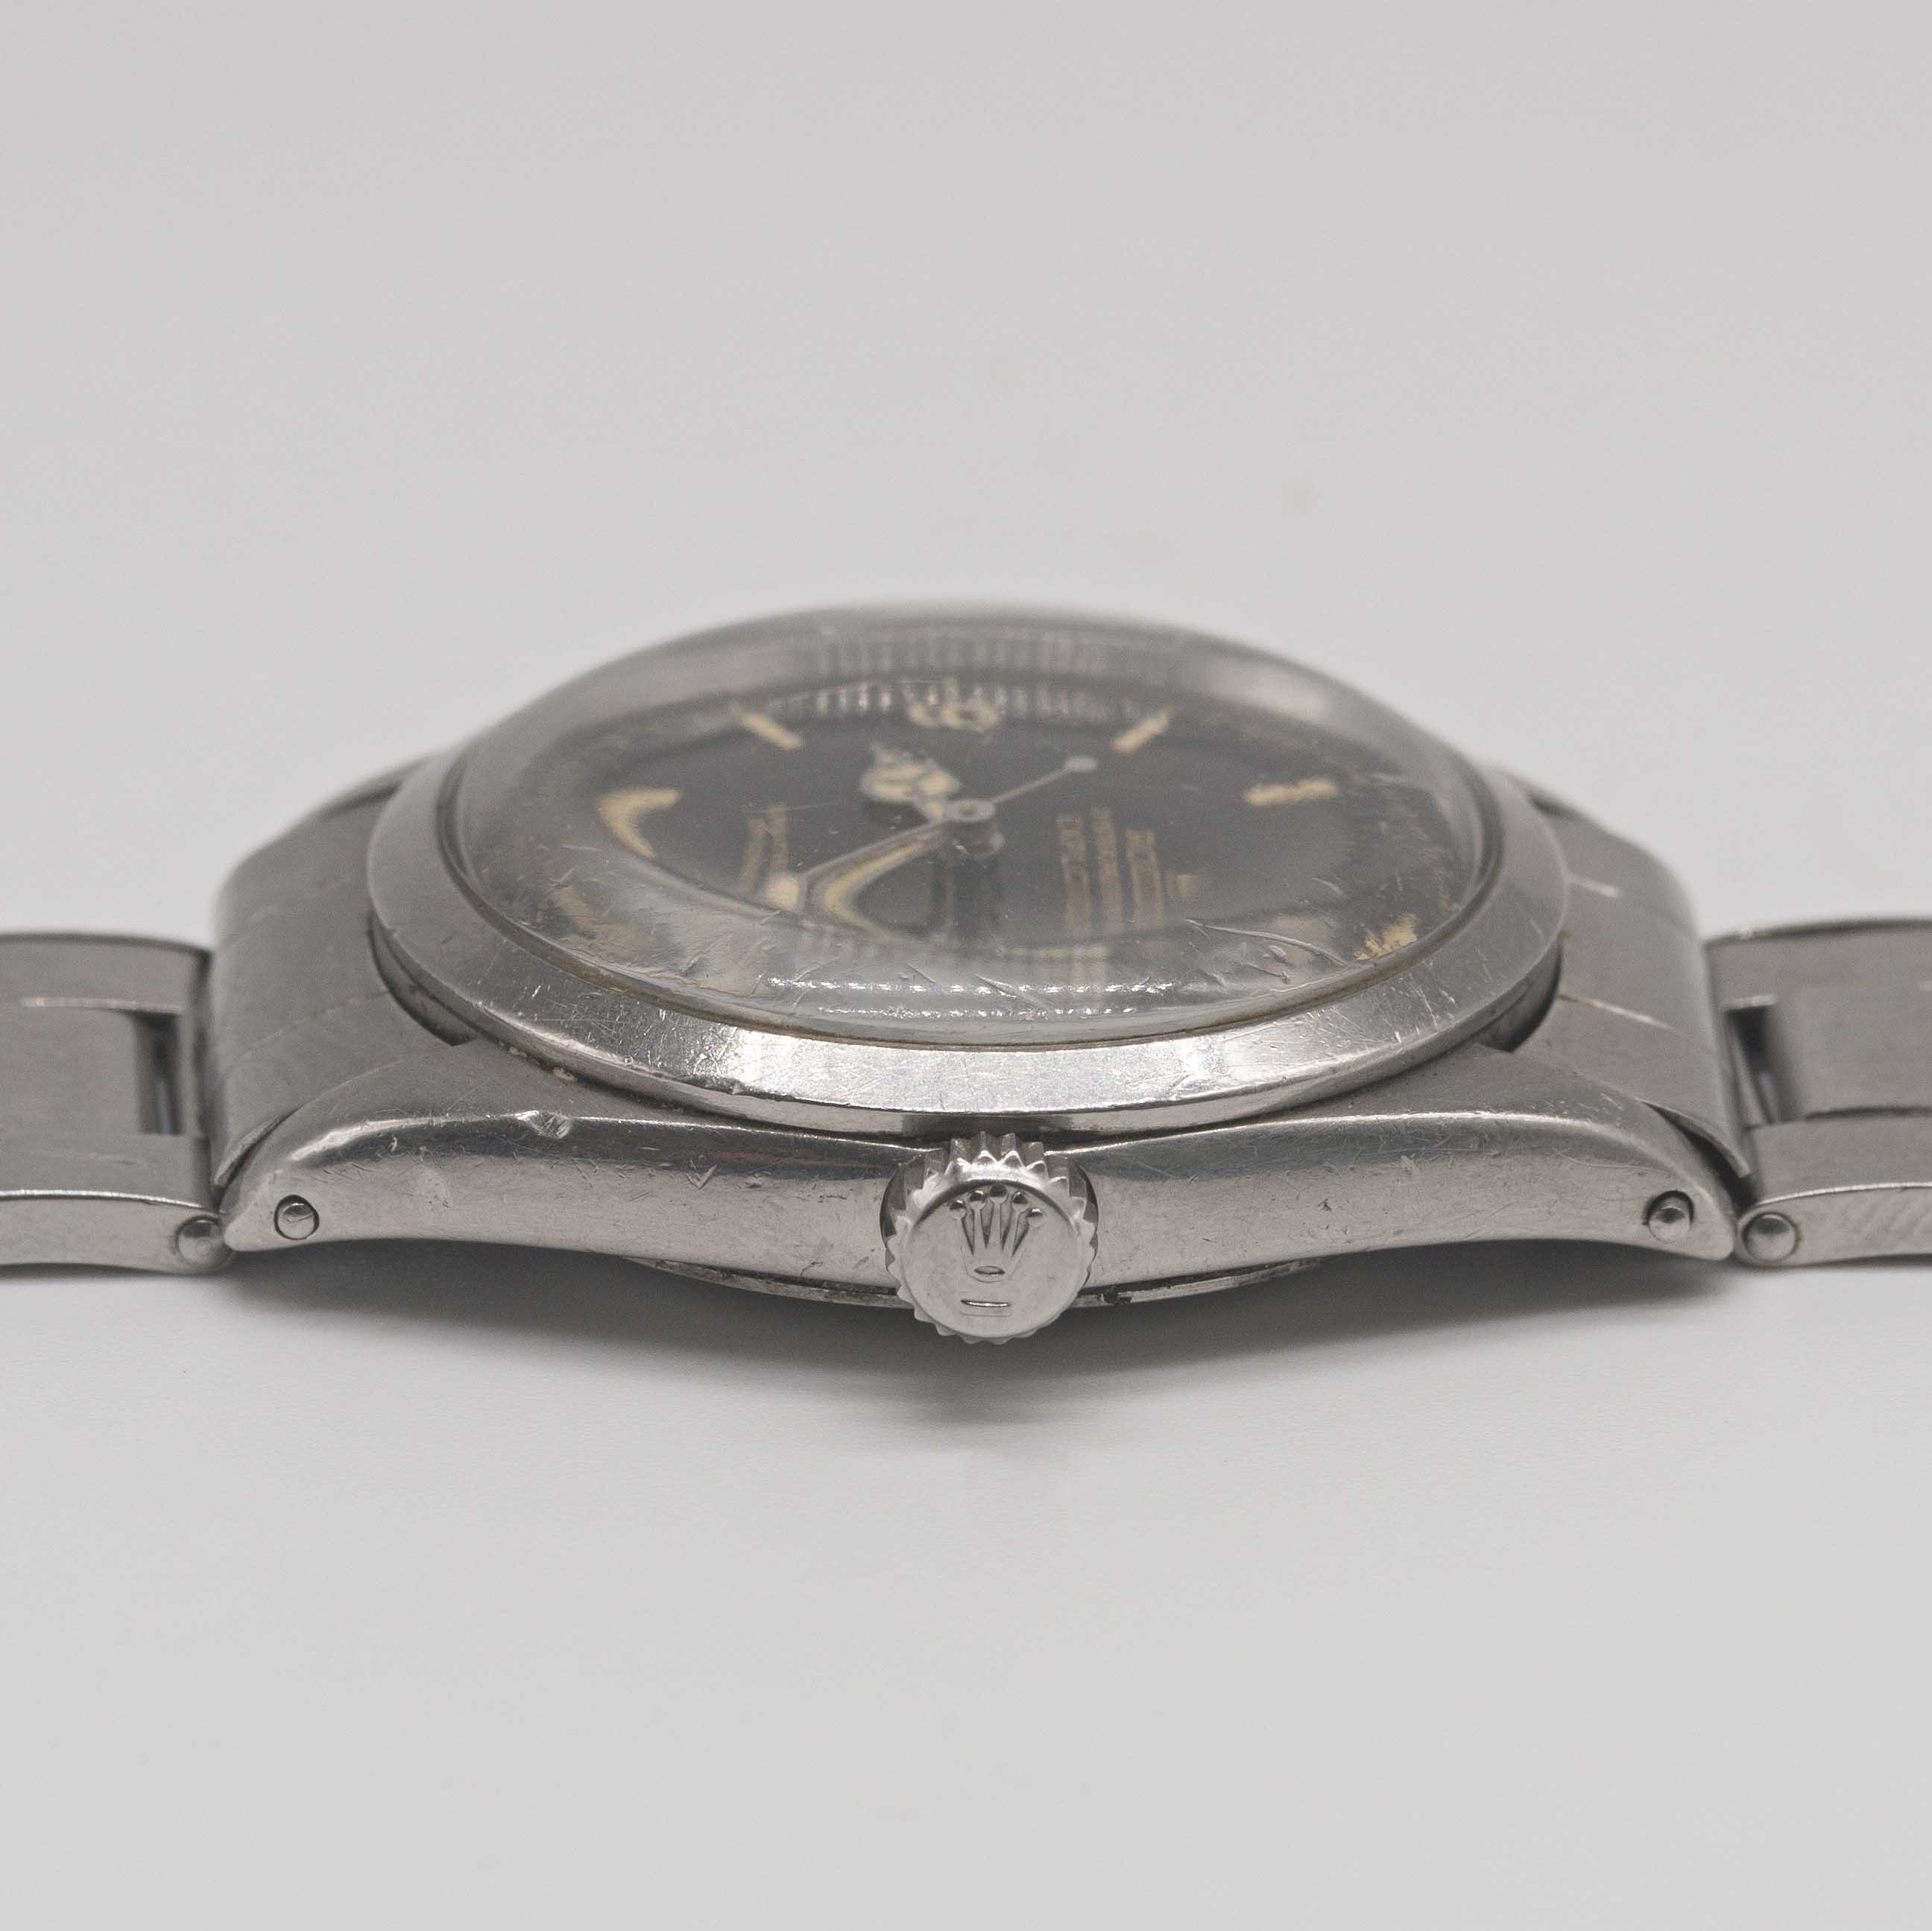 A VERY RARE GENTLEMAN'S STAINLESS STEEL ROLEX OYSTER PERPETUAL EXPLORER BRACELET WATCH CIRCA 1964, - Image 12 of 15